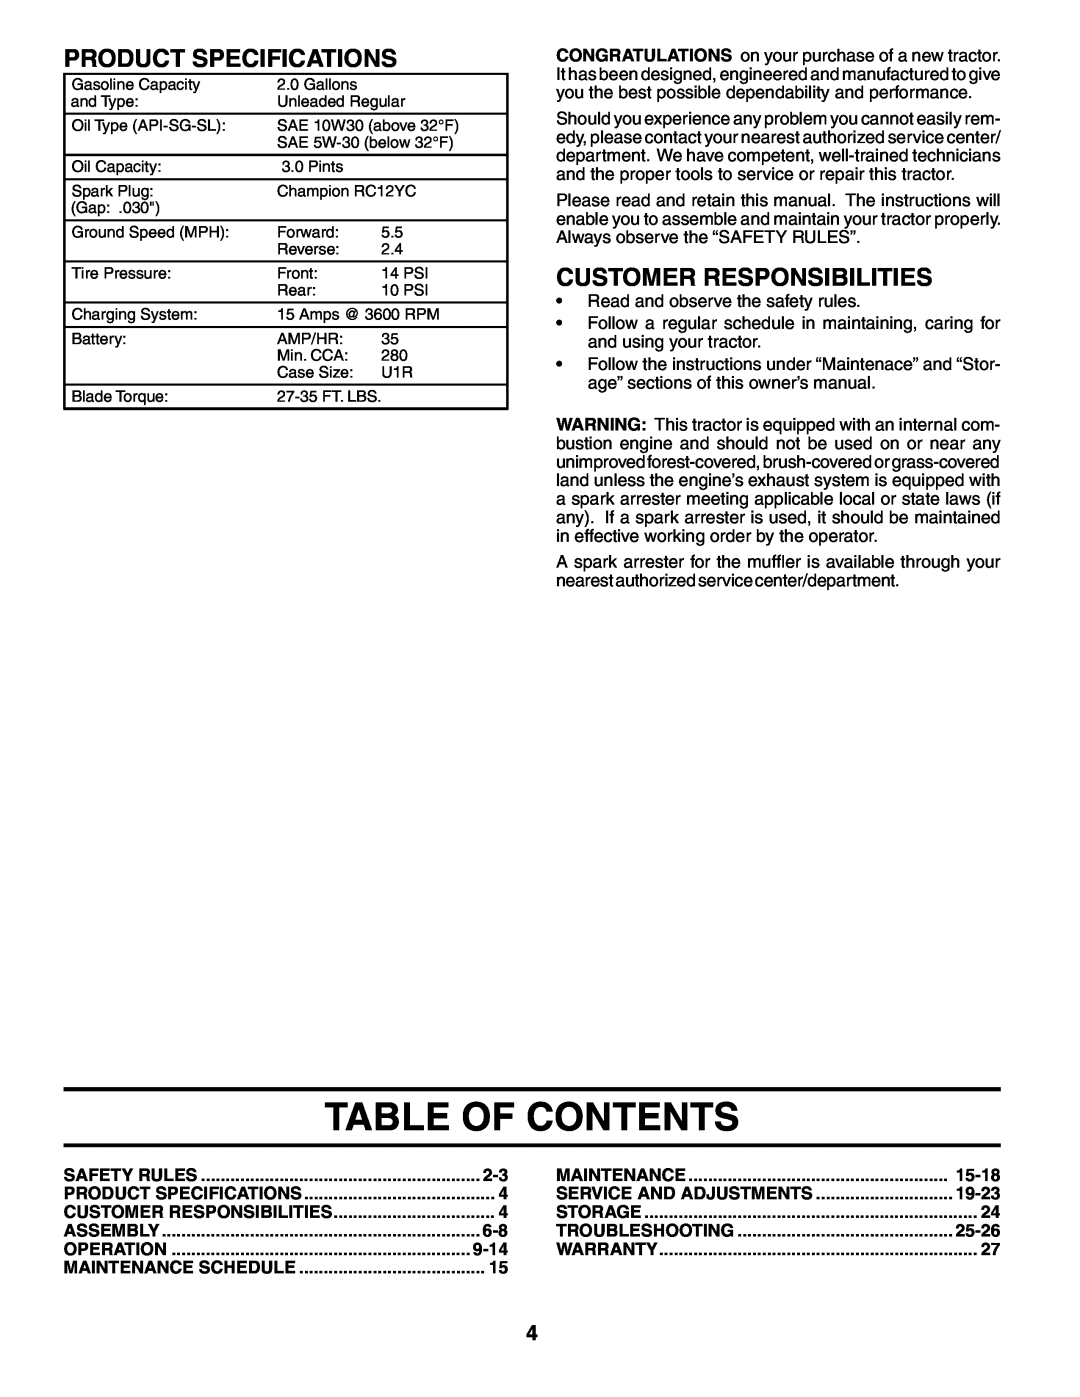 Poulan 194831 manual Table Of Contents, Product Specifications, Customer Responsibilities, 9-14, 15-18, 19-23, 25-26 